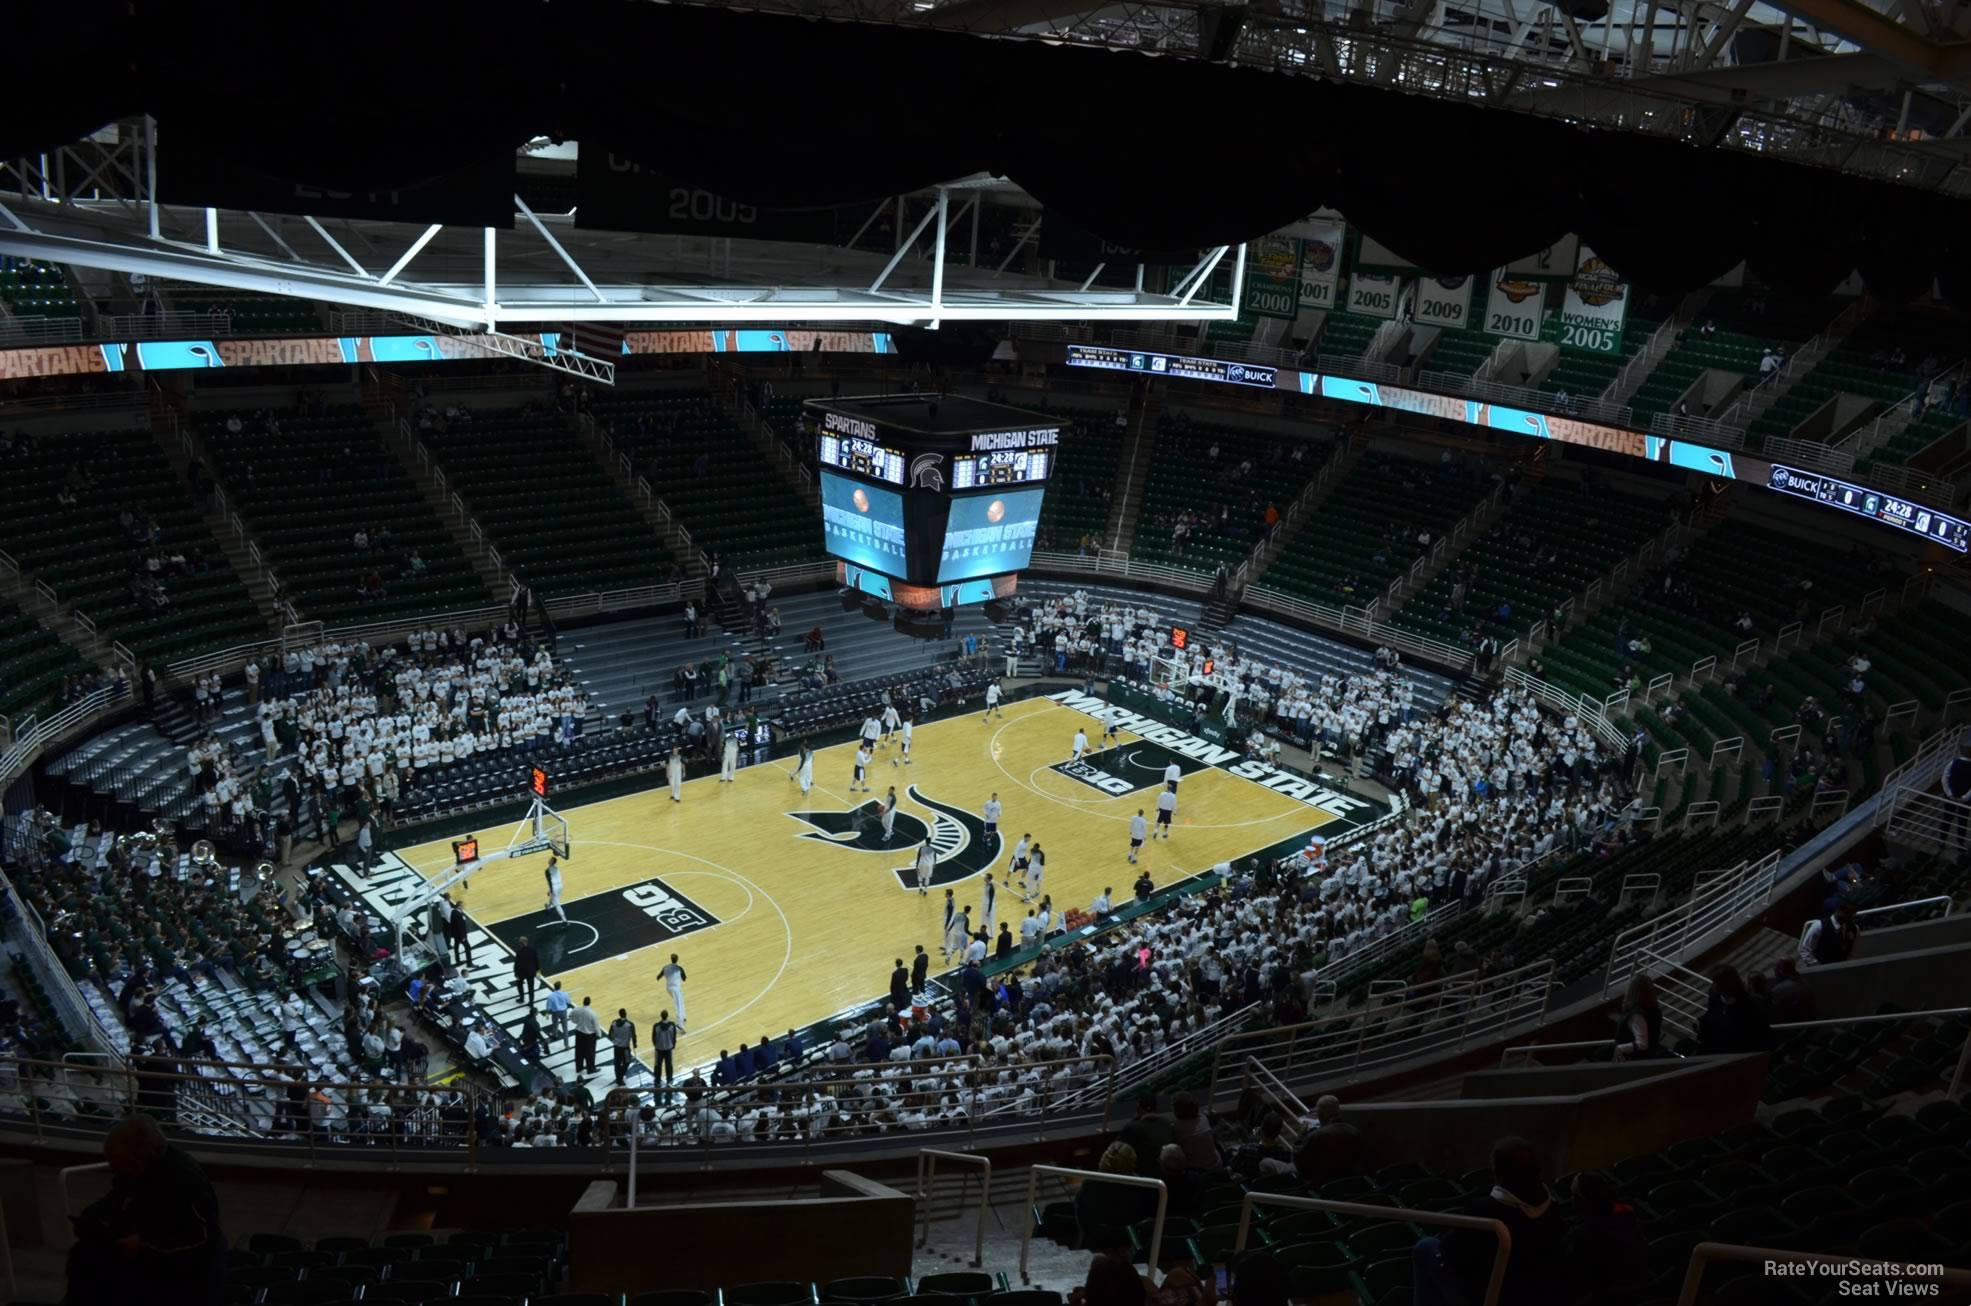 section 213, row 15 seat view  - breslin center